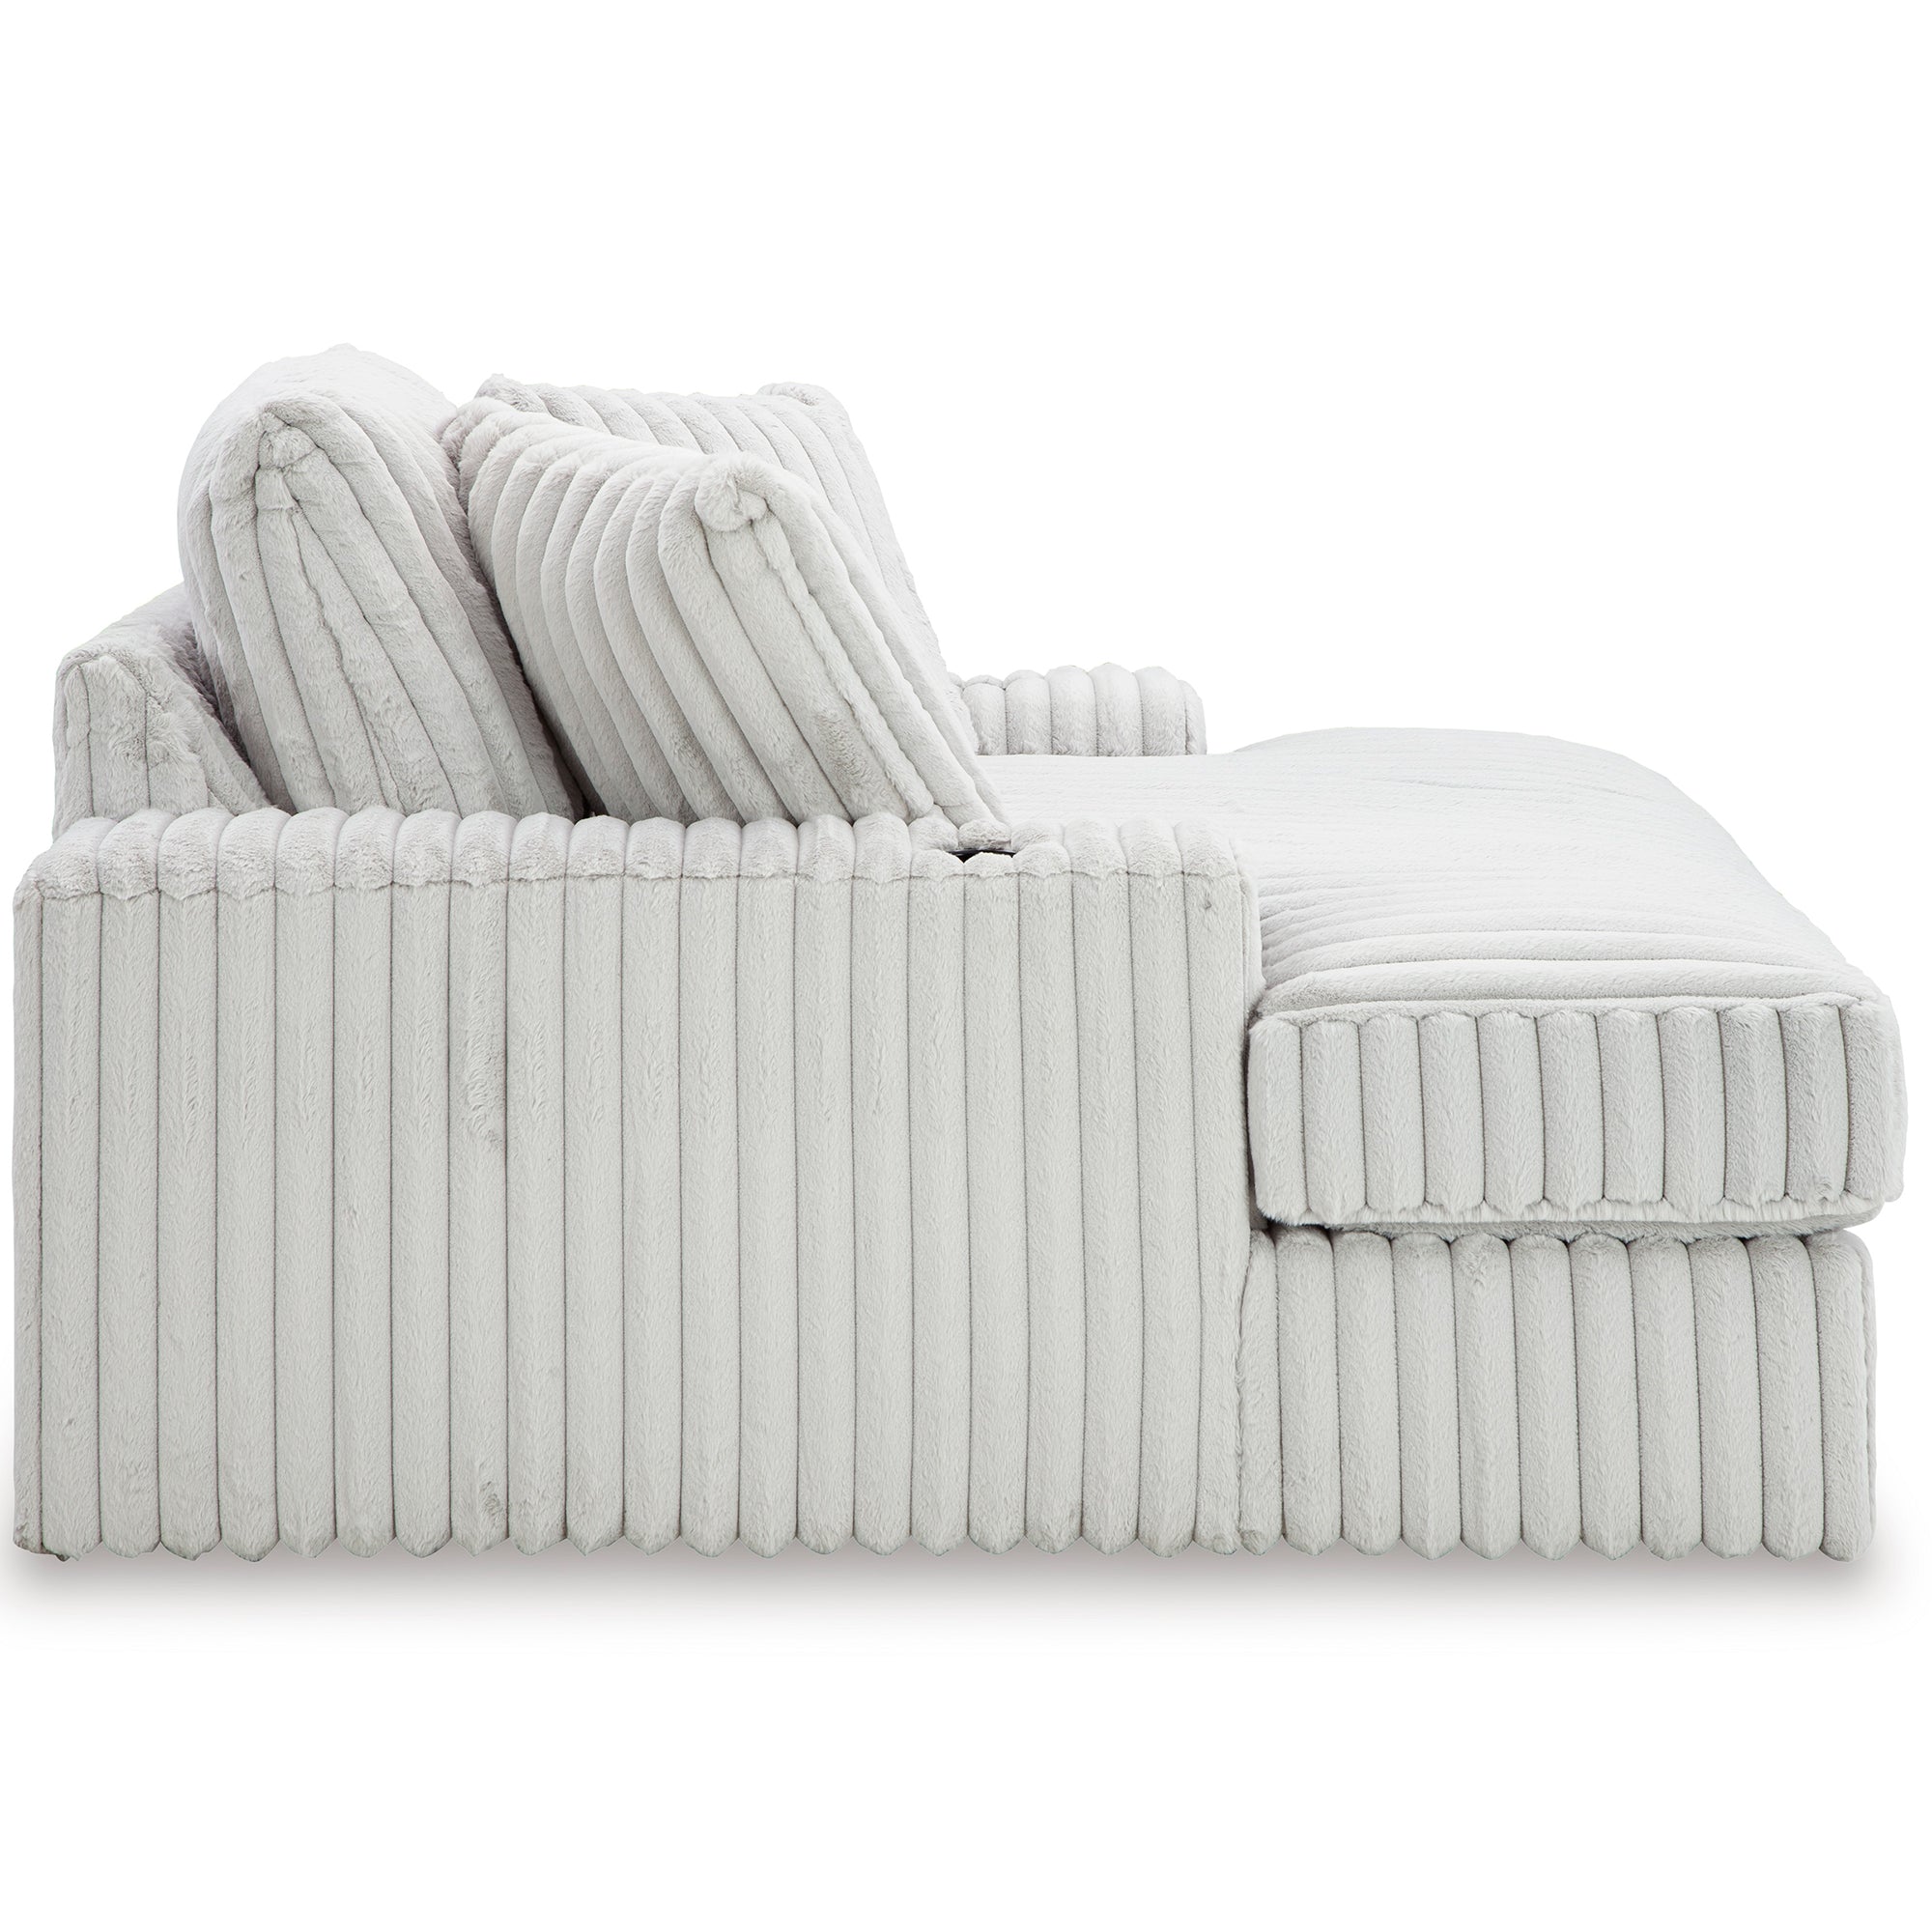 Functional and stylish Stupendous Oversized Chaise with built-in amenities to keep your essentials within reach